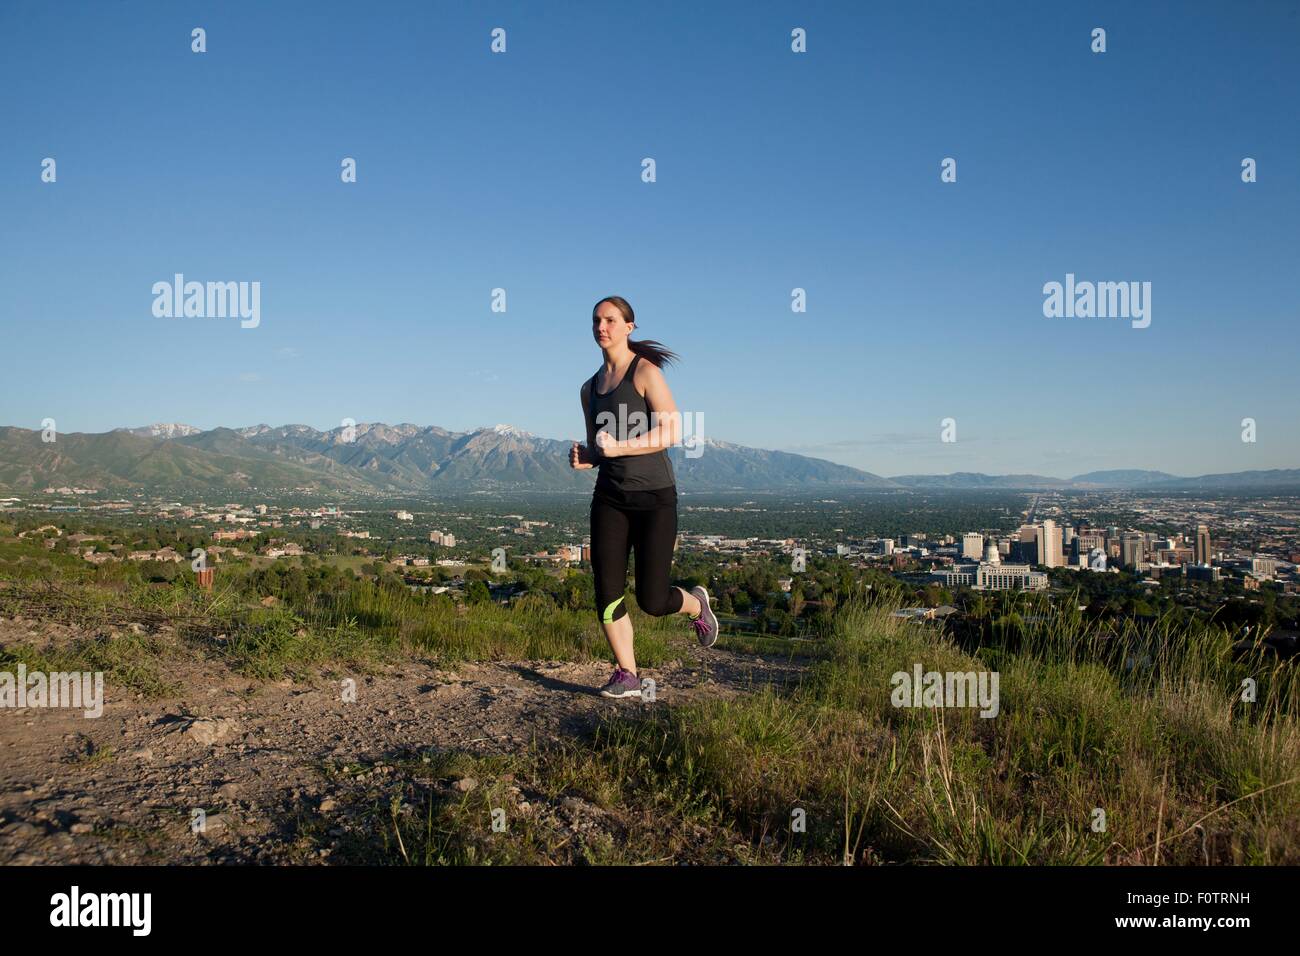 Young female runner running along track above city in valley Stock Photo